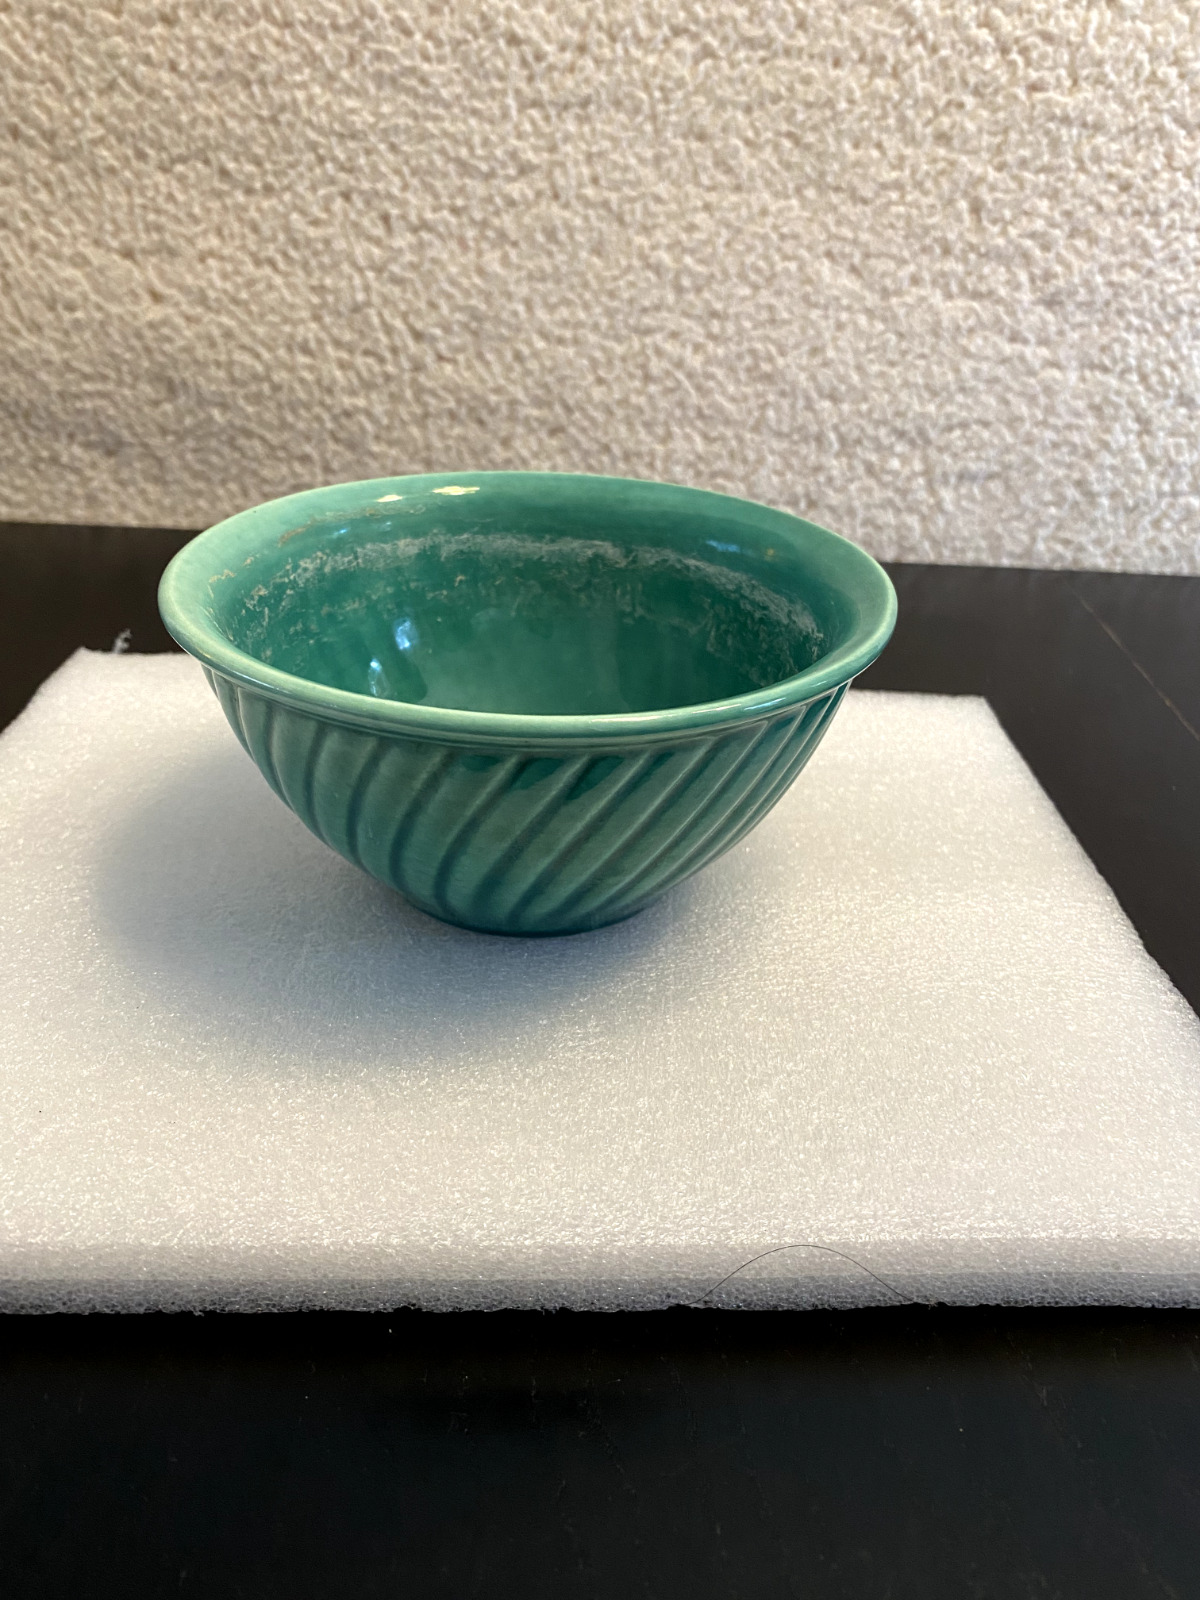 A vintage Chinese green porcelain bowl with waves around the side